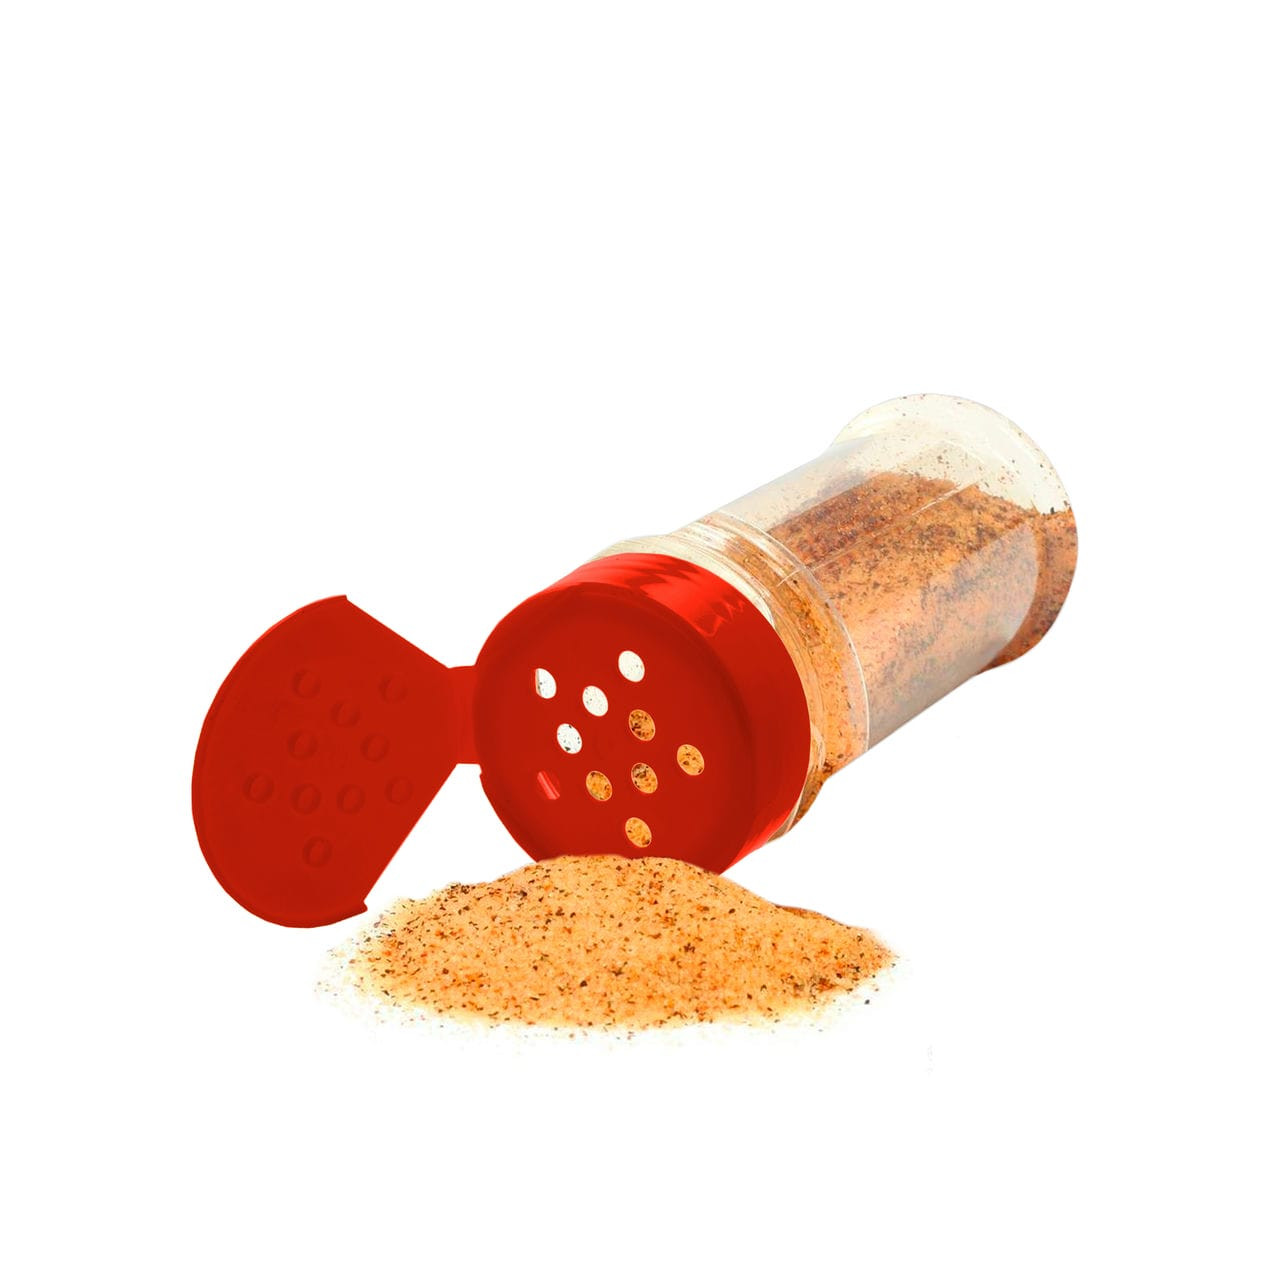 https://cdn11.bigcommerce.com/s-p3slyoyyuy/images/stencil/1280x1280/products/25598/45553/containers-8oz_red_side_with_spice__12795.1678922949.jpg?c=1